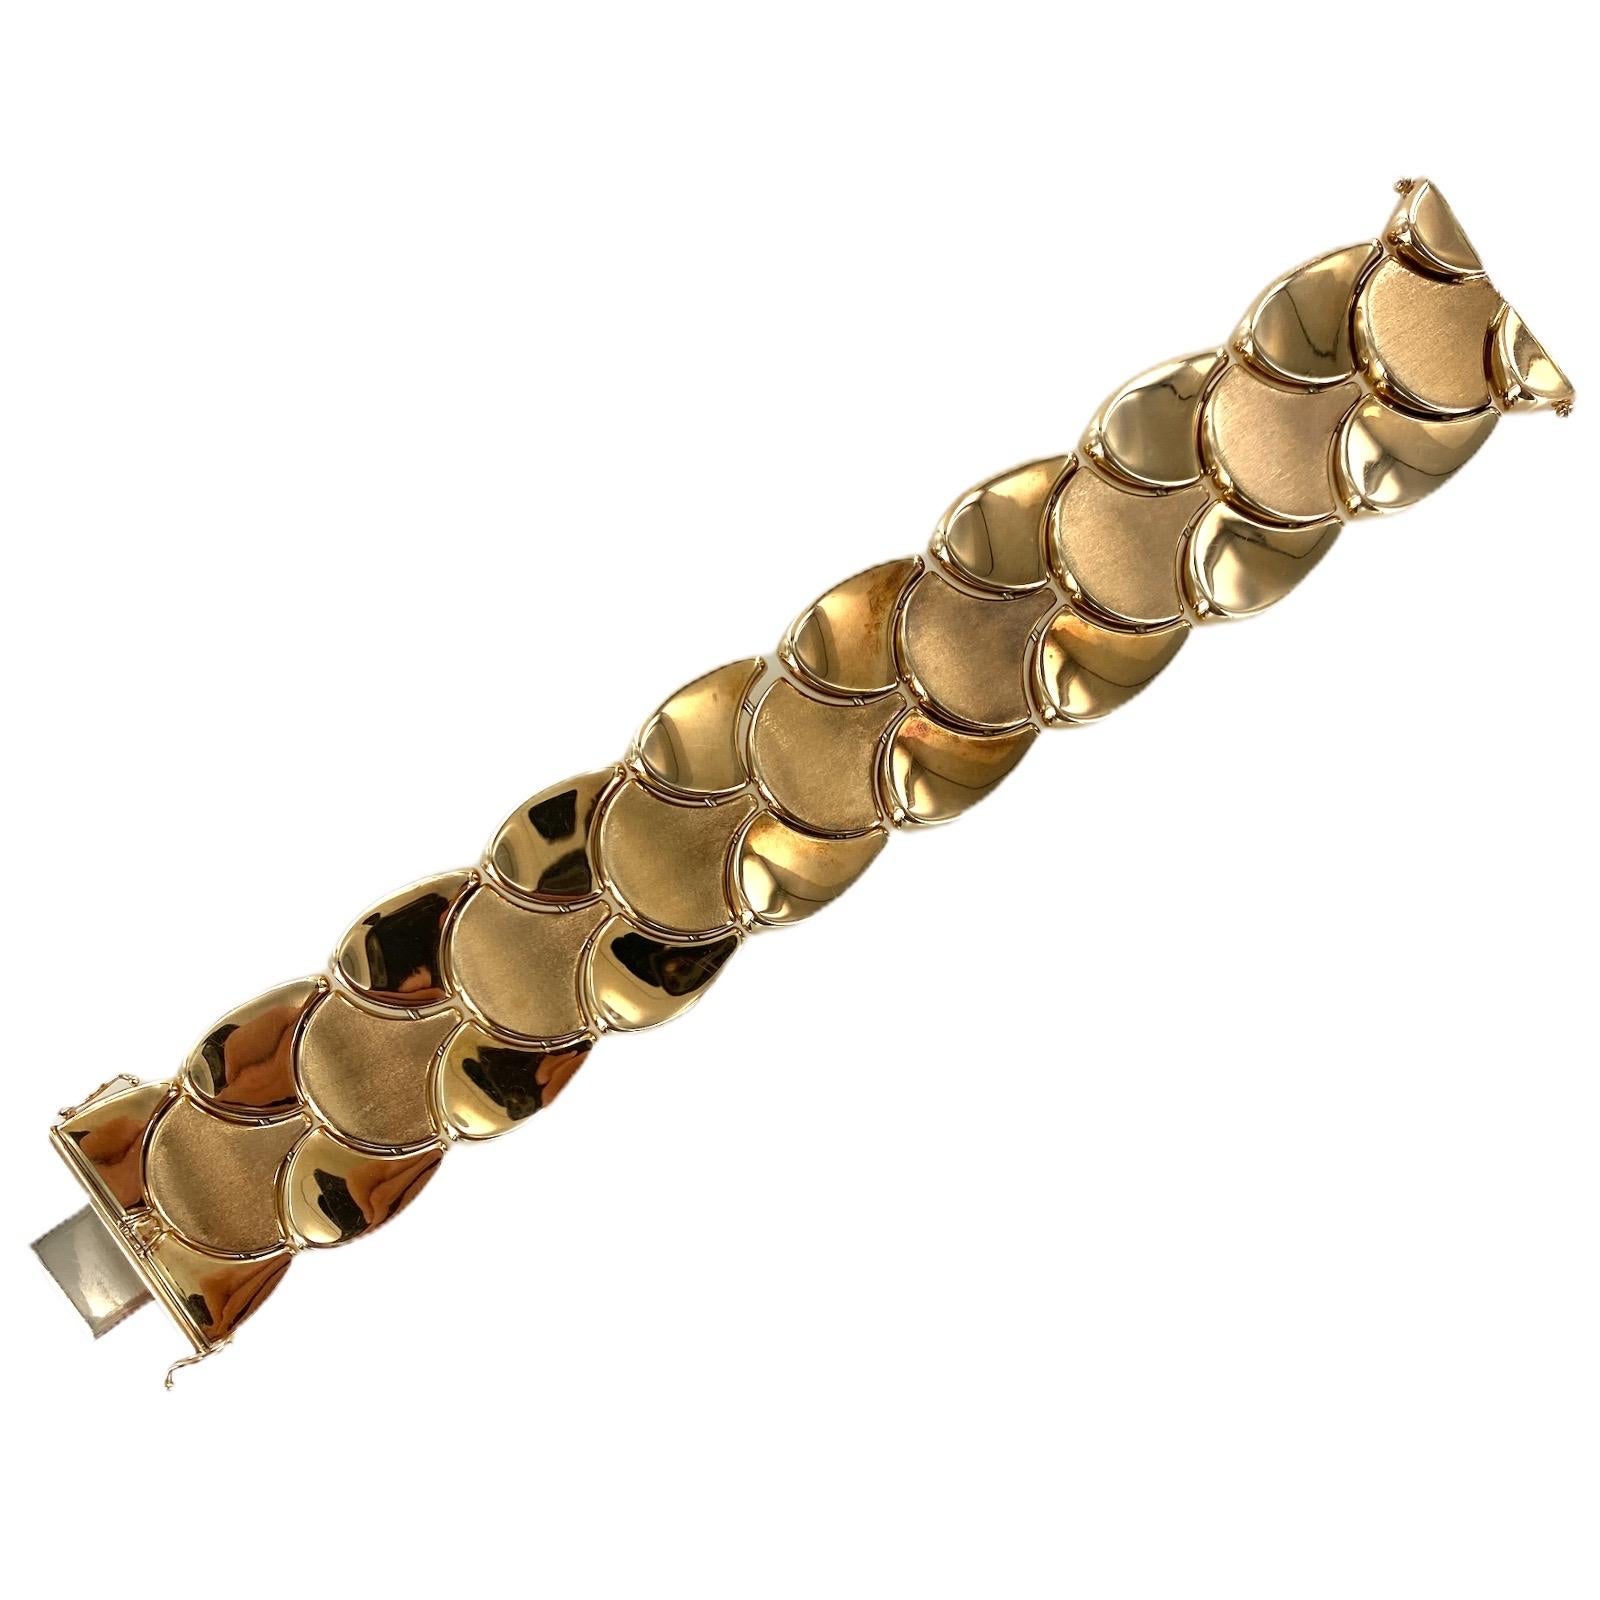 Italian wide link vintage bracelet fashioned in polished and satin finished 14 karat yellow gold. The bracelet measures 7.25 inches in length and 1.0 inch in width. 